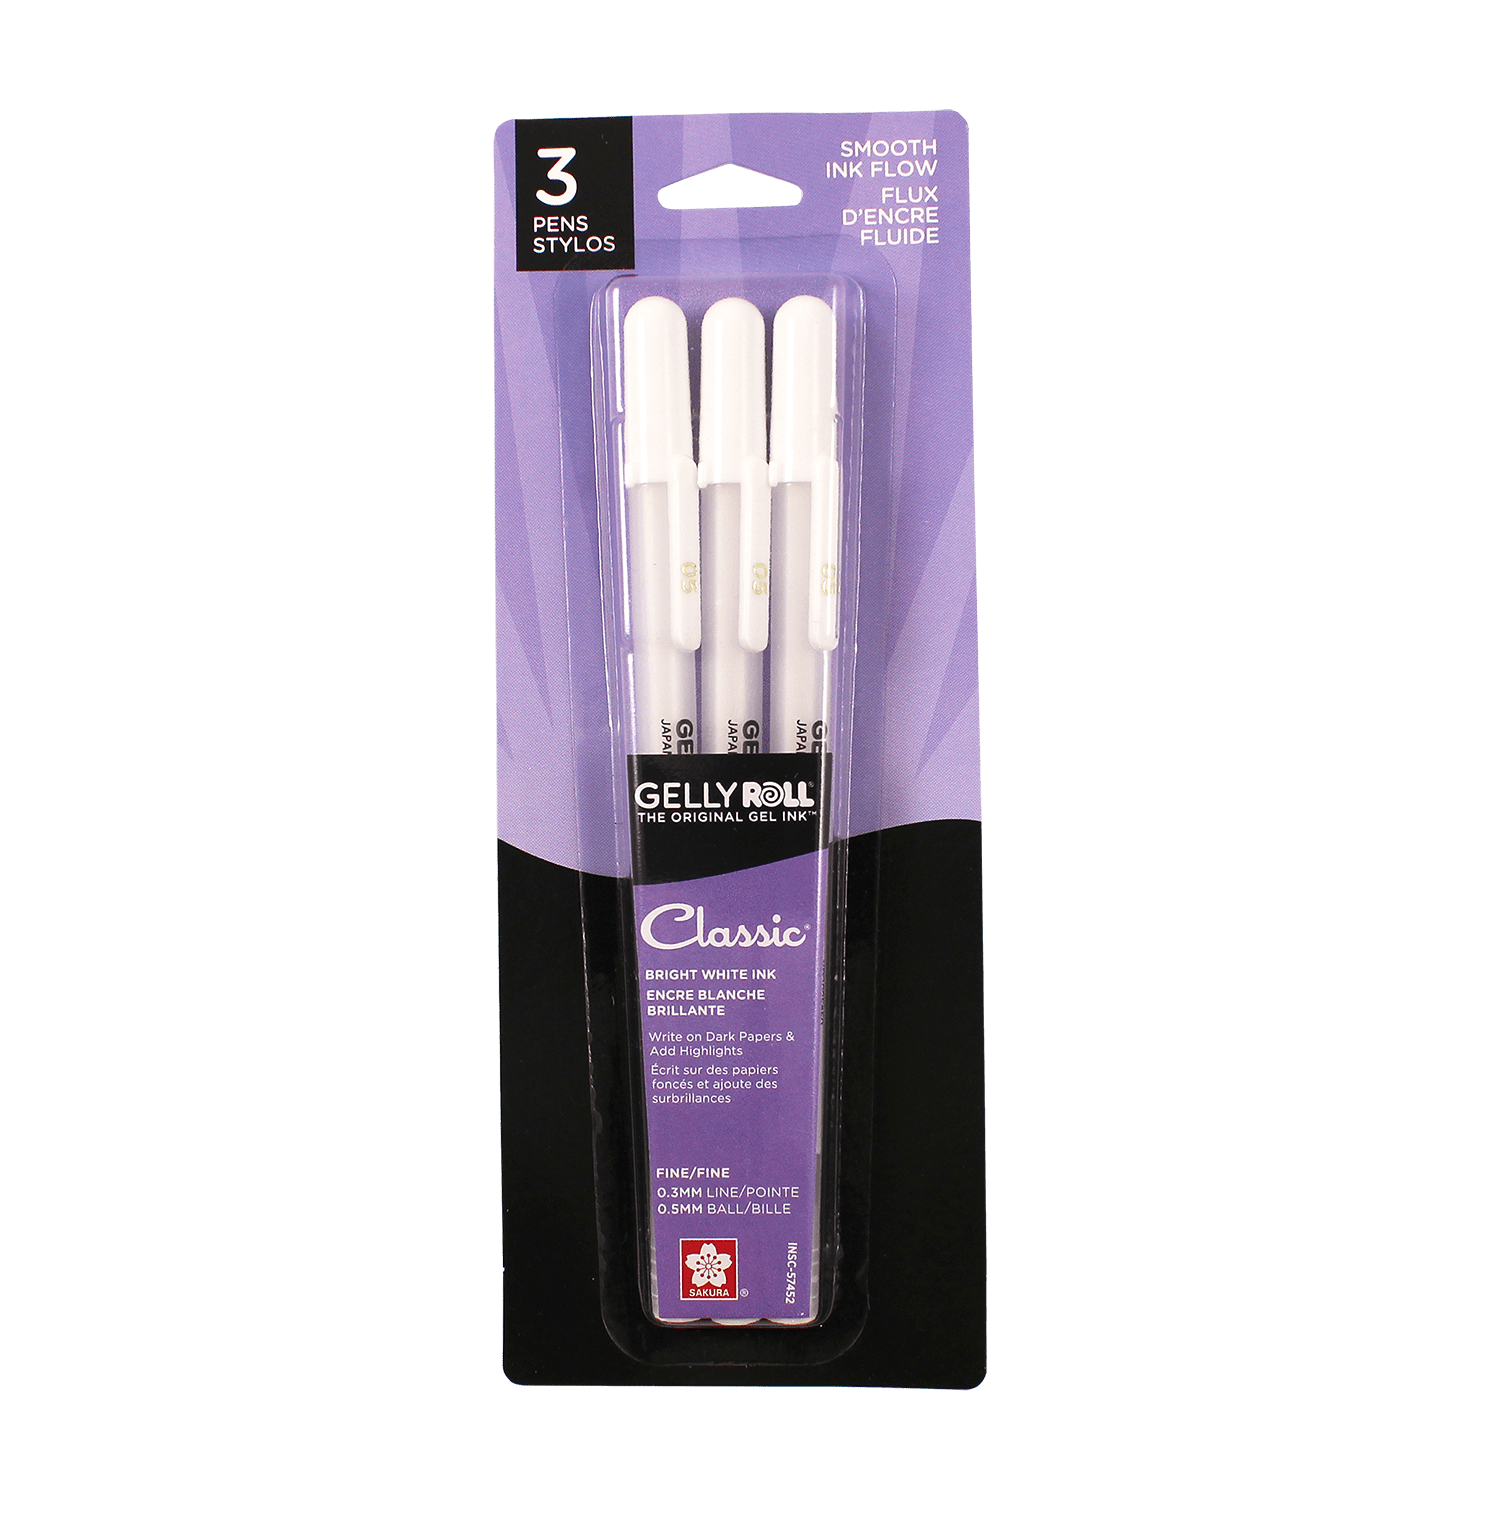  Qionew White Gel Pen Set, 3 Pack, 1mm Extra Fine